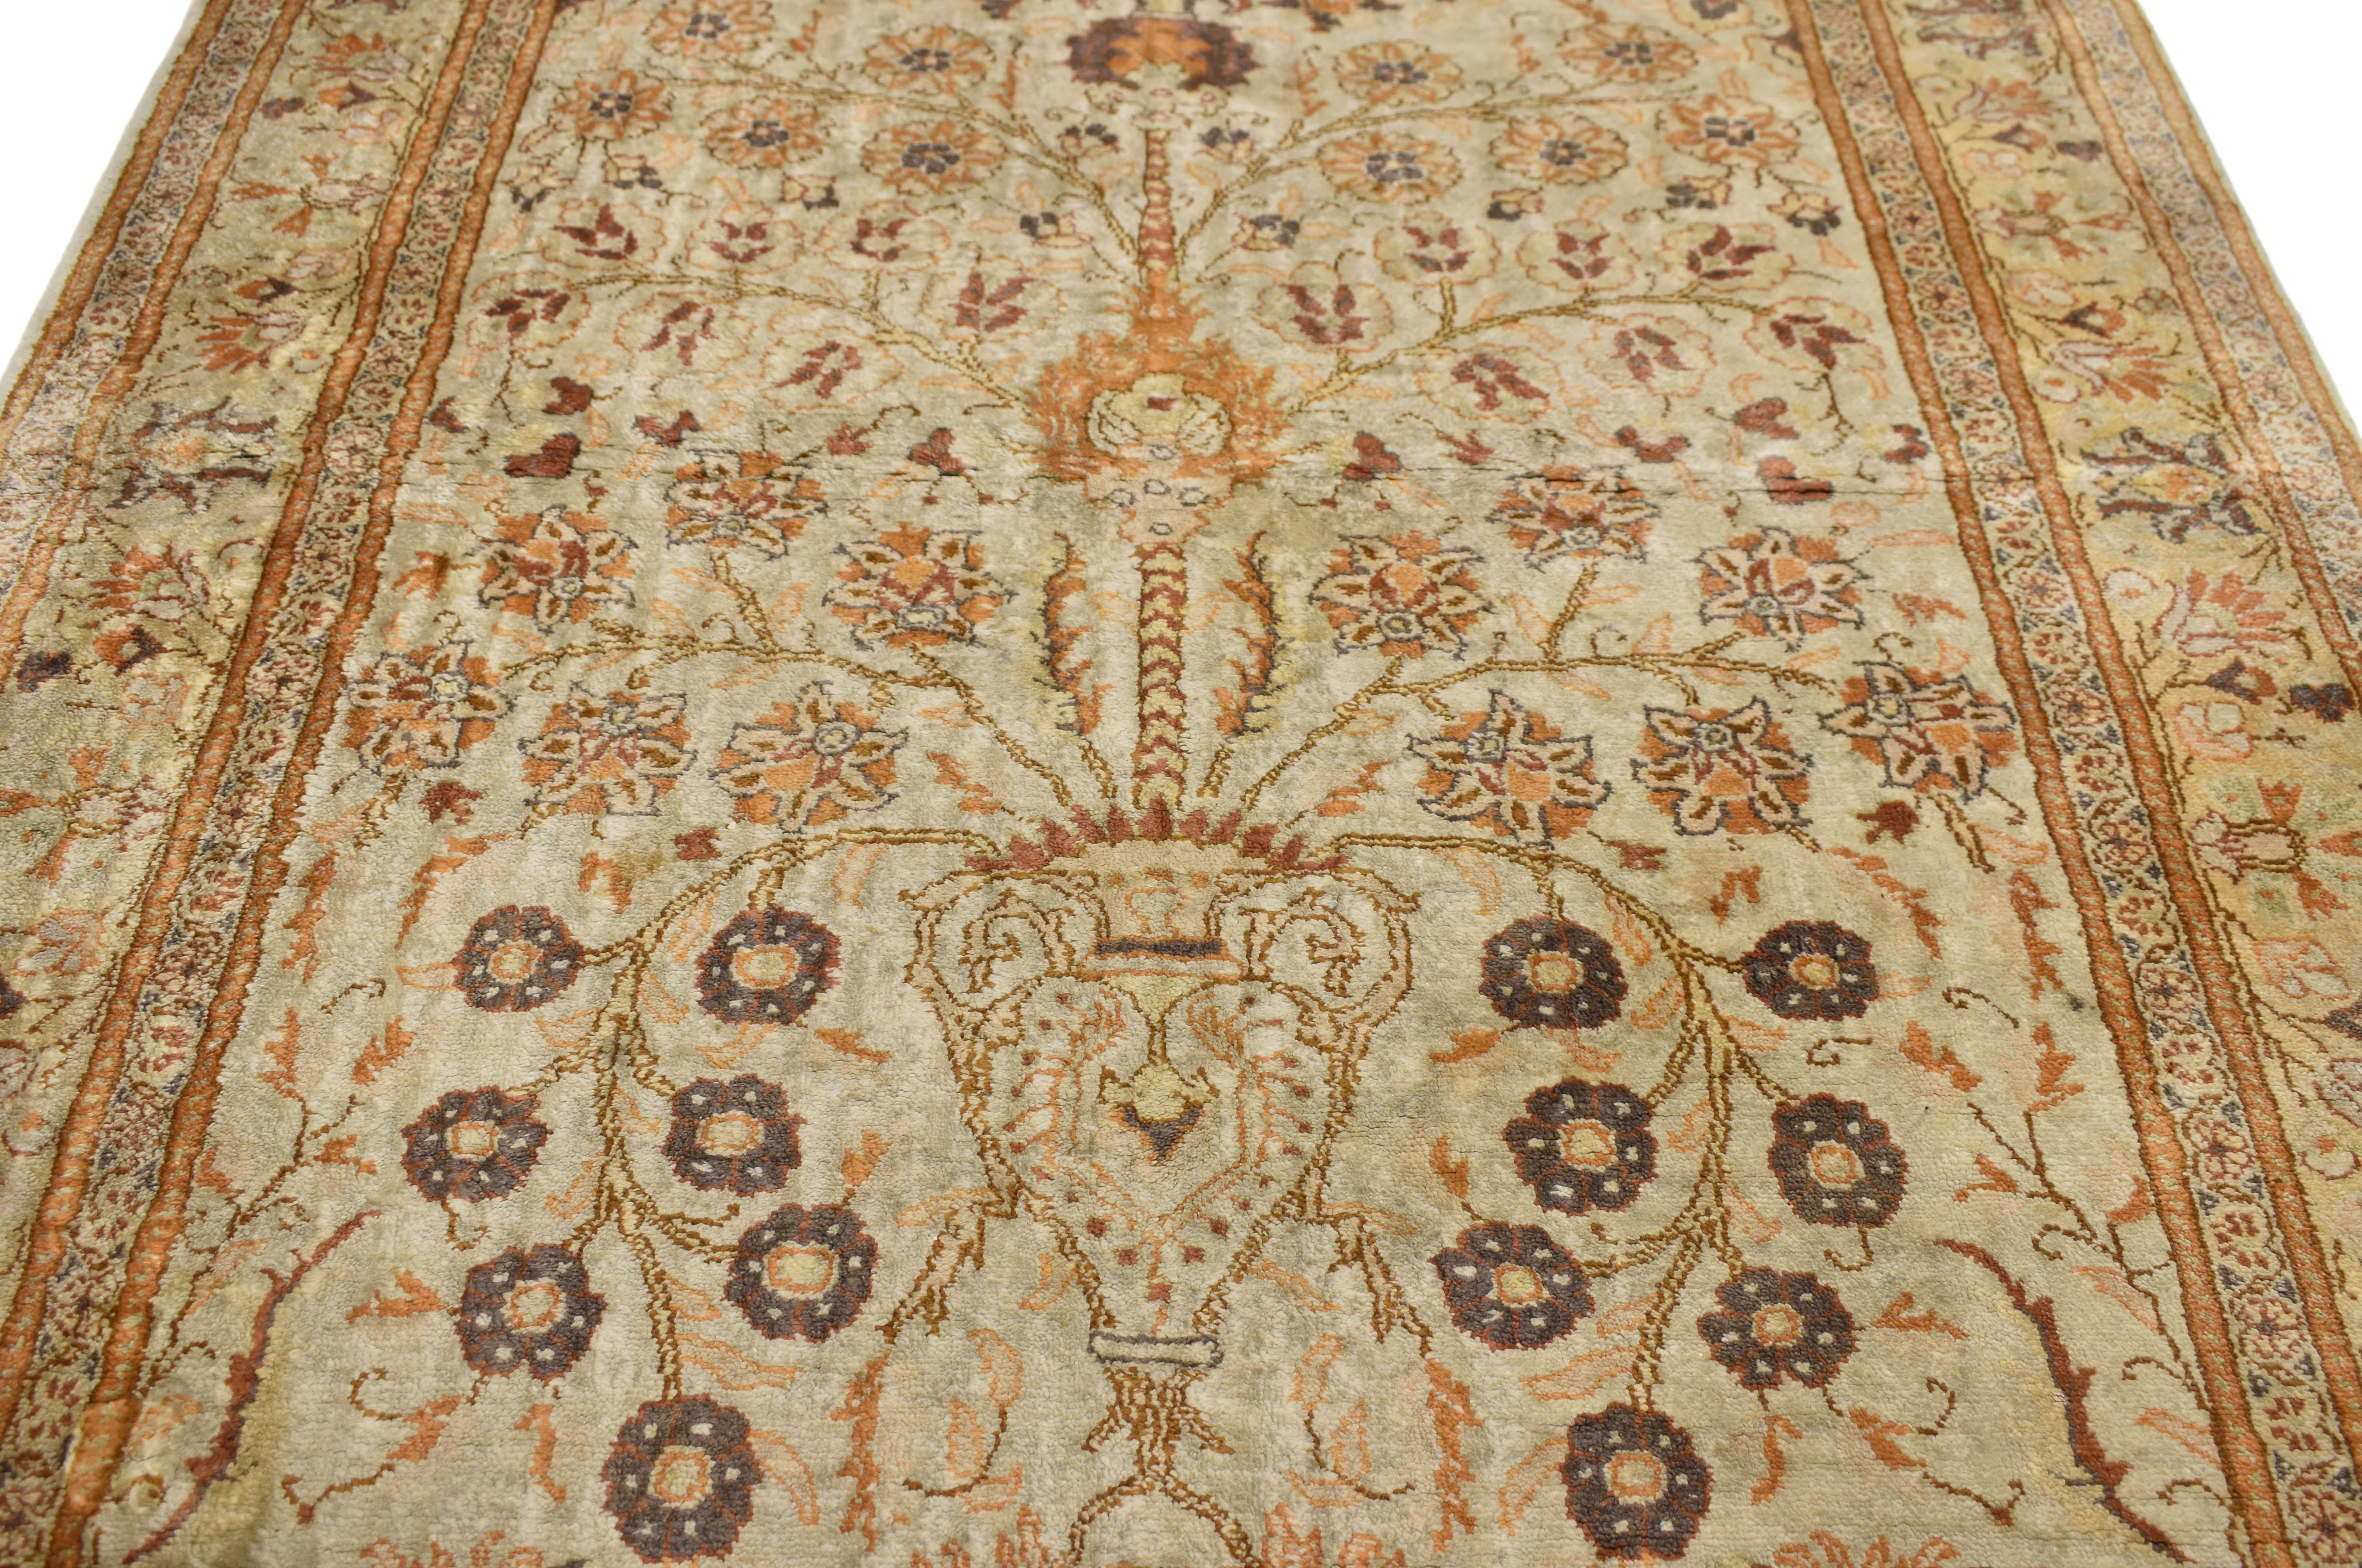 Vintage Turkish Oushak Rug with Vase Design In Good Condition For Sale In Dallas, TX